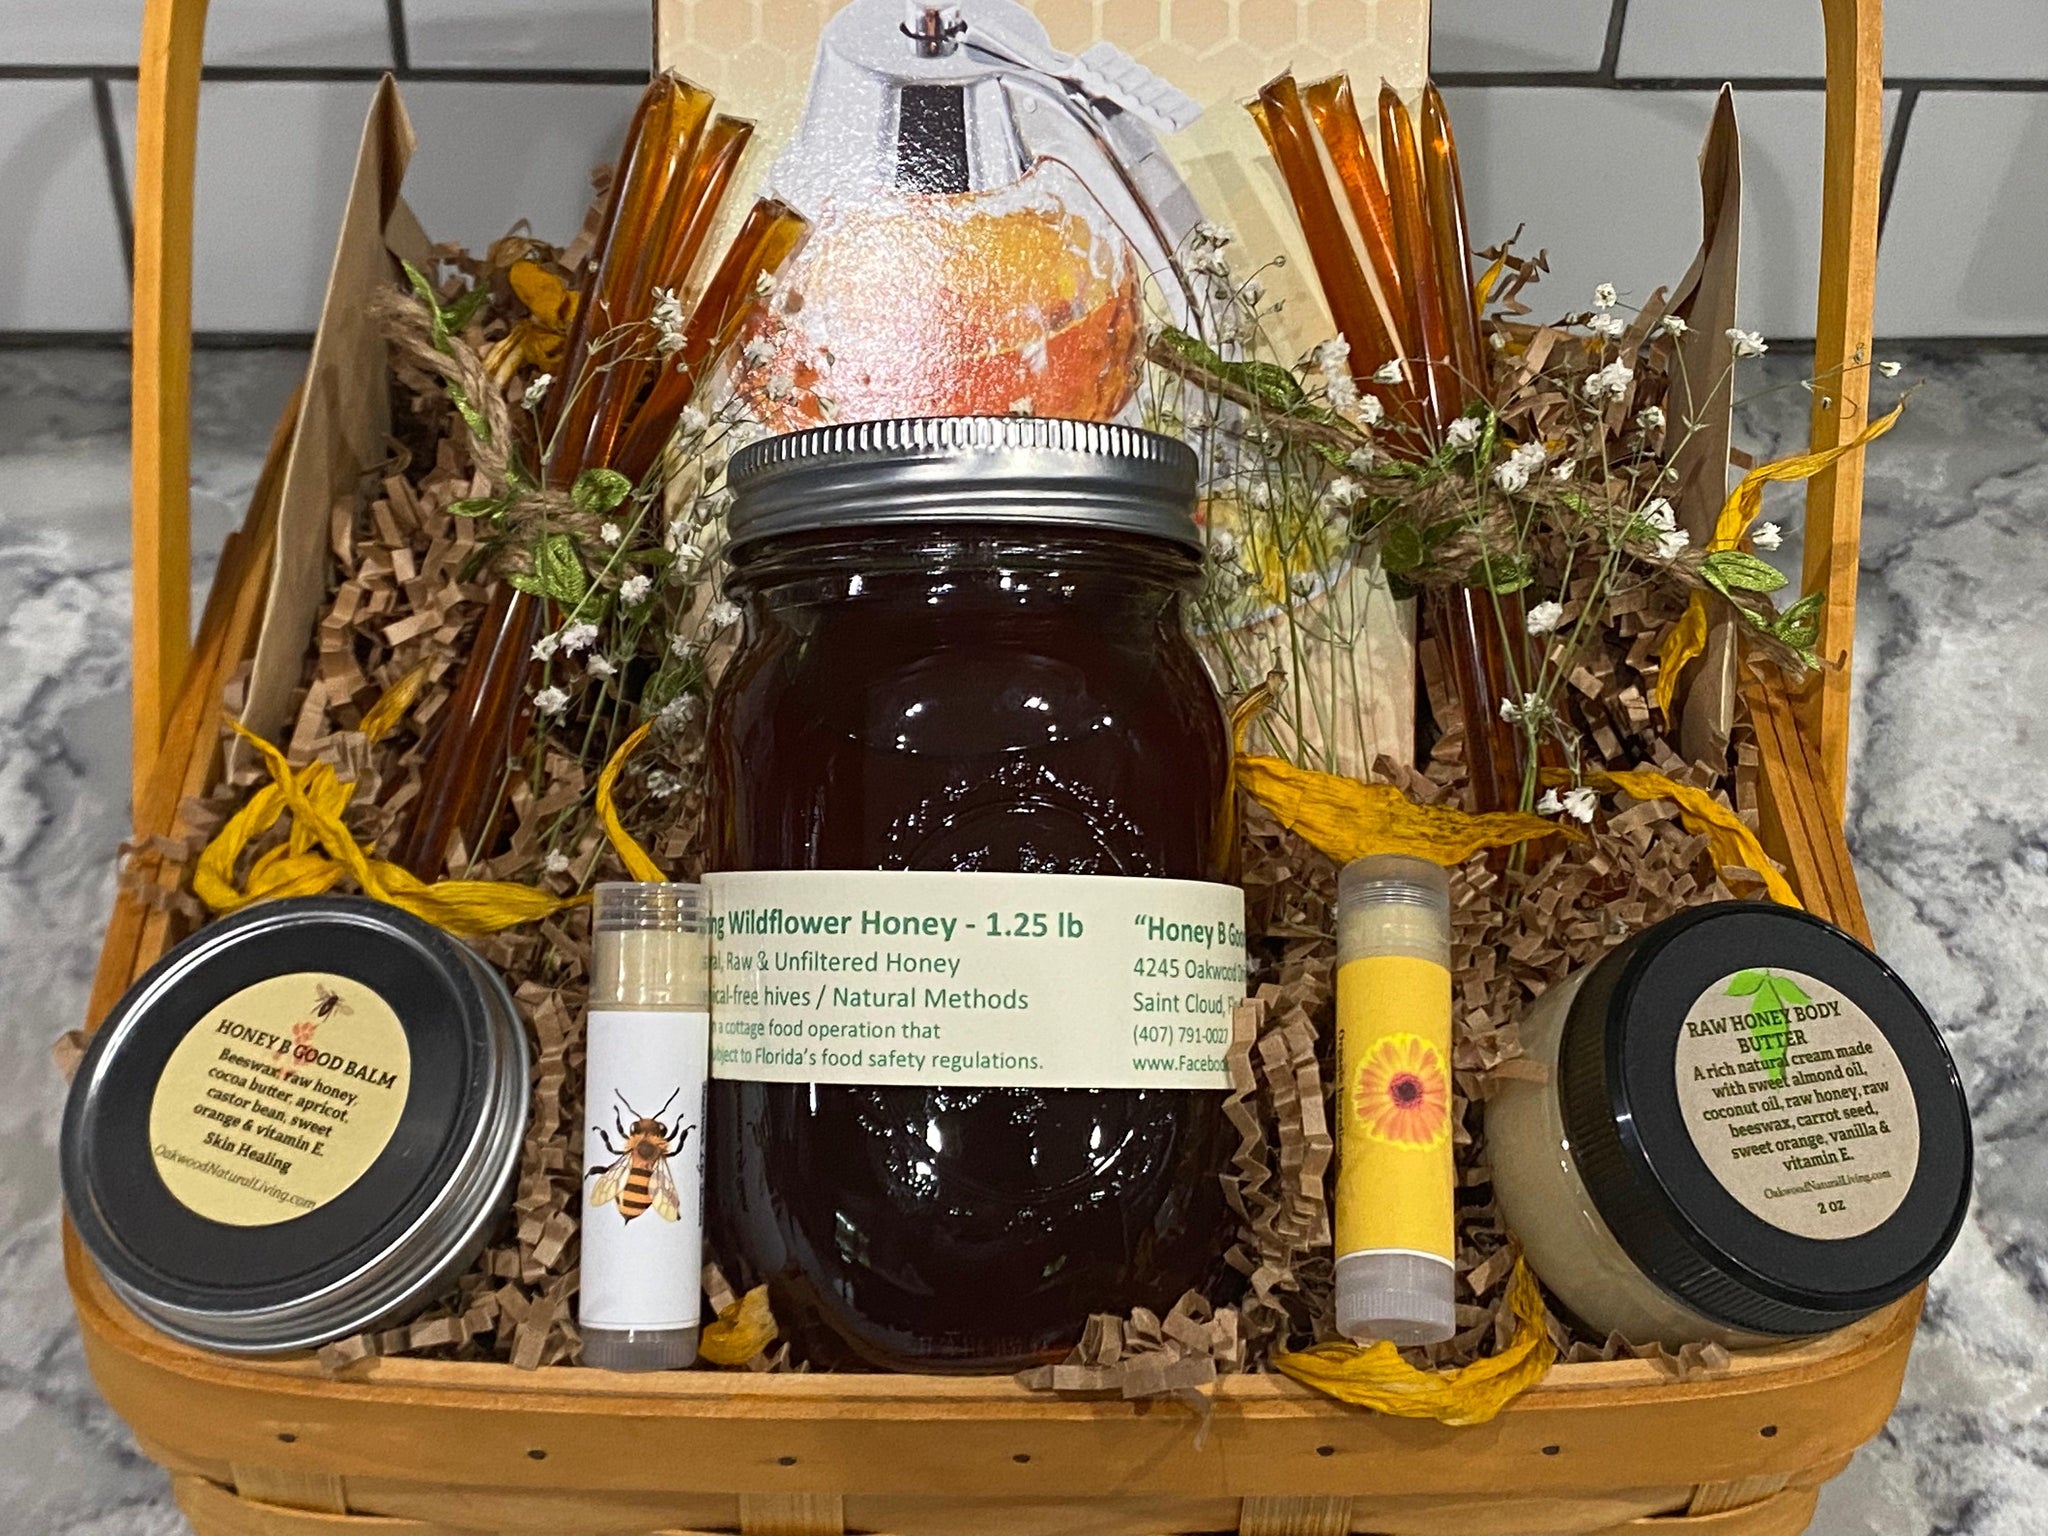 Honey Gift Basket. Raw Honey, 100% Beeswax Candle, Handcrafted Lip